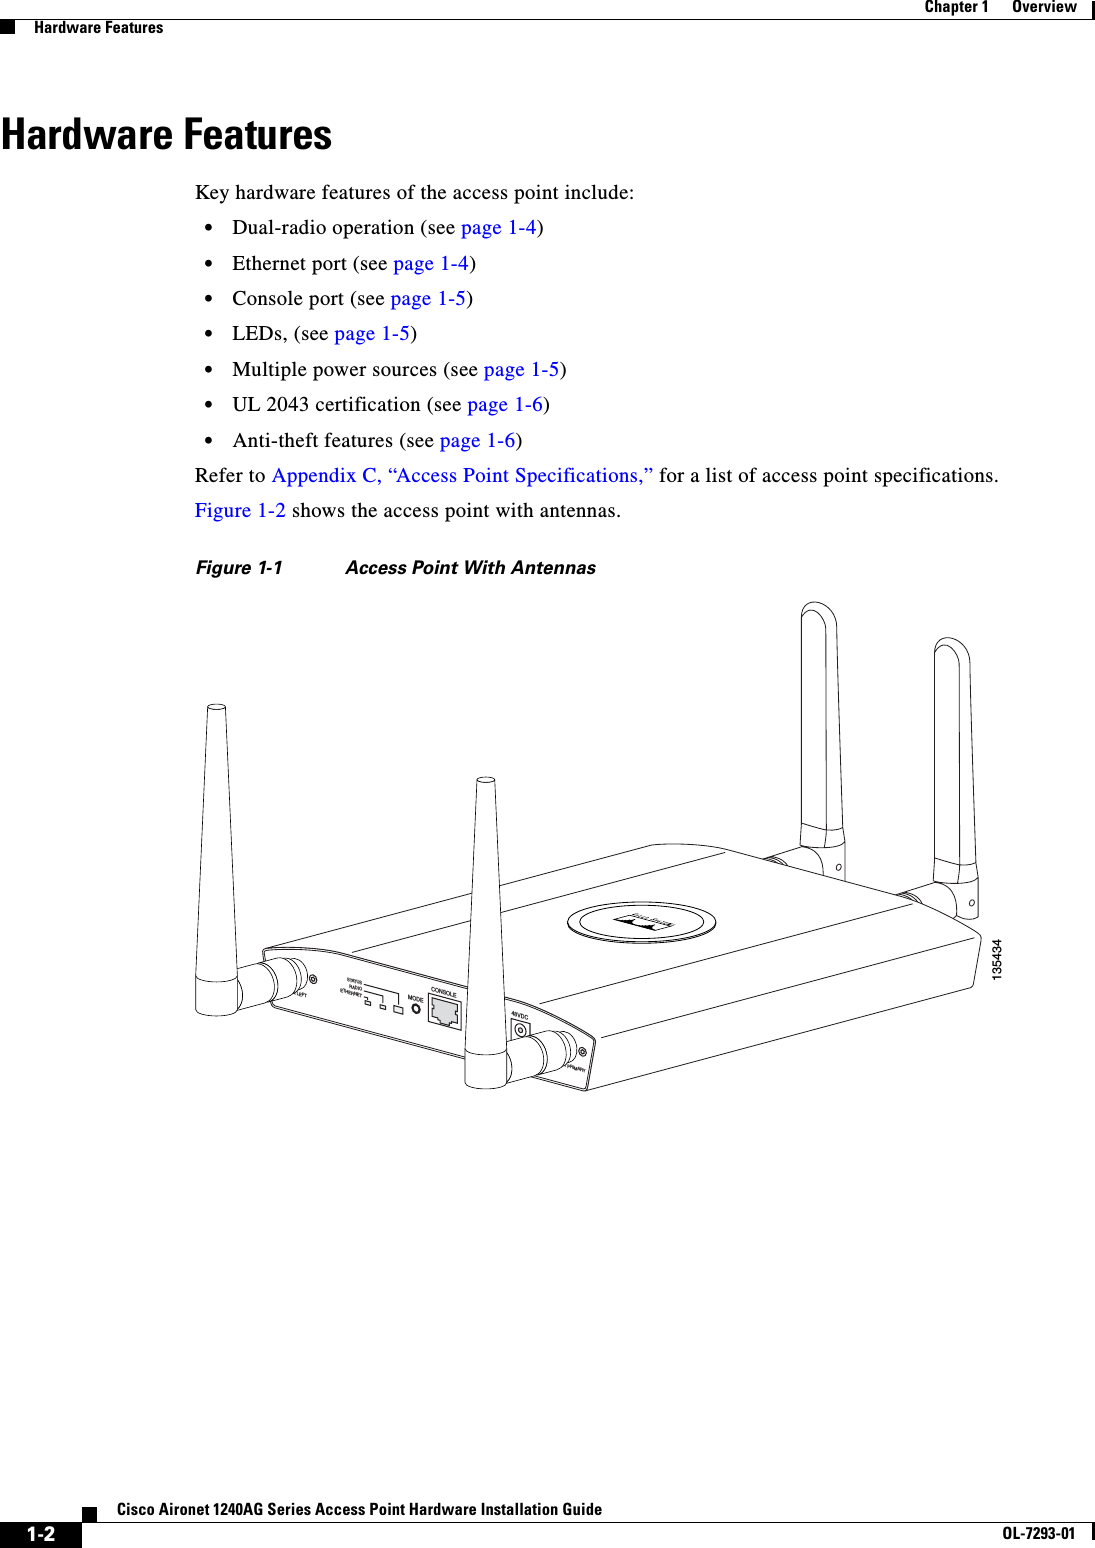  1-2Cisco Aironet 1240AG Series Access Point Hardware Installation GuideOL-7293-01Chapter 1      OverviewHardware FeaturesHardware FeaturesKey hardware features of the access point include:•Dual-radio operation (see page 1-4)•Ethernet port (see page 1-4)•Console port (see page 1-5)•LEDs, (see page 1-5)•Multiple power sources (see page 1-5)•UL 2043 certification (see page 1-6)•Anti-theft features (see page 1-6) Refer to Appendix C, “Access Point Specifications,” for a list of access point specifications.Figure 1-2 shows the access point with antennas.Figure 1-1 Access Point With Antennas135434S TAT U SRADIOETHERNETMODECONSOLE ETHERNET 48VDC2.4 GHz RIGHT / PRIMARY 2.4 GHz LEFT